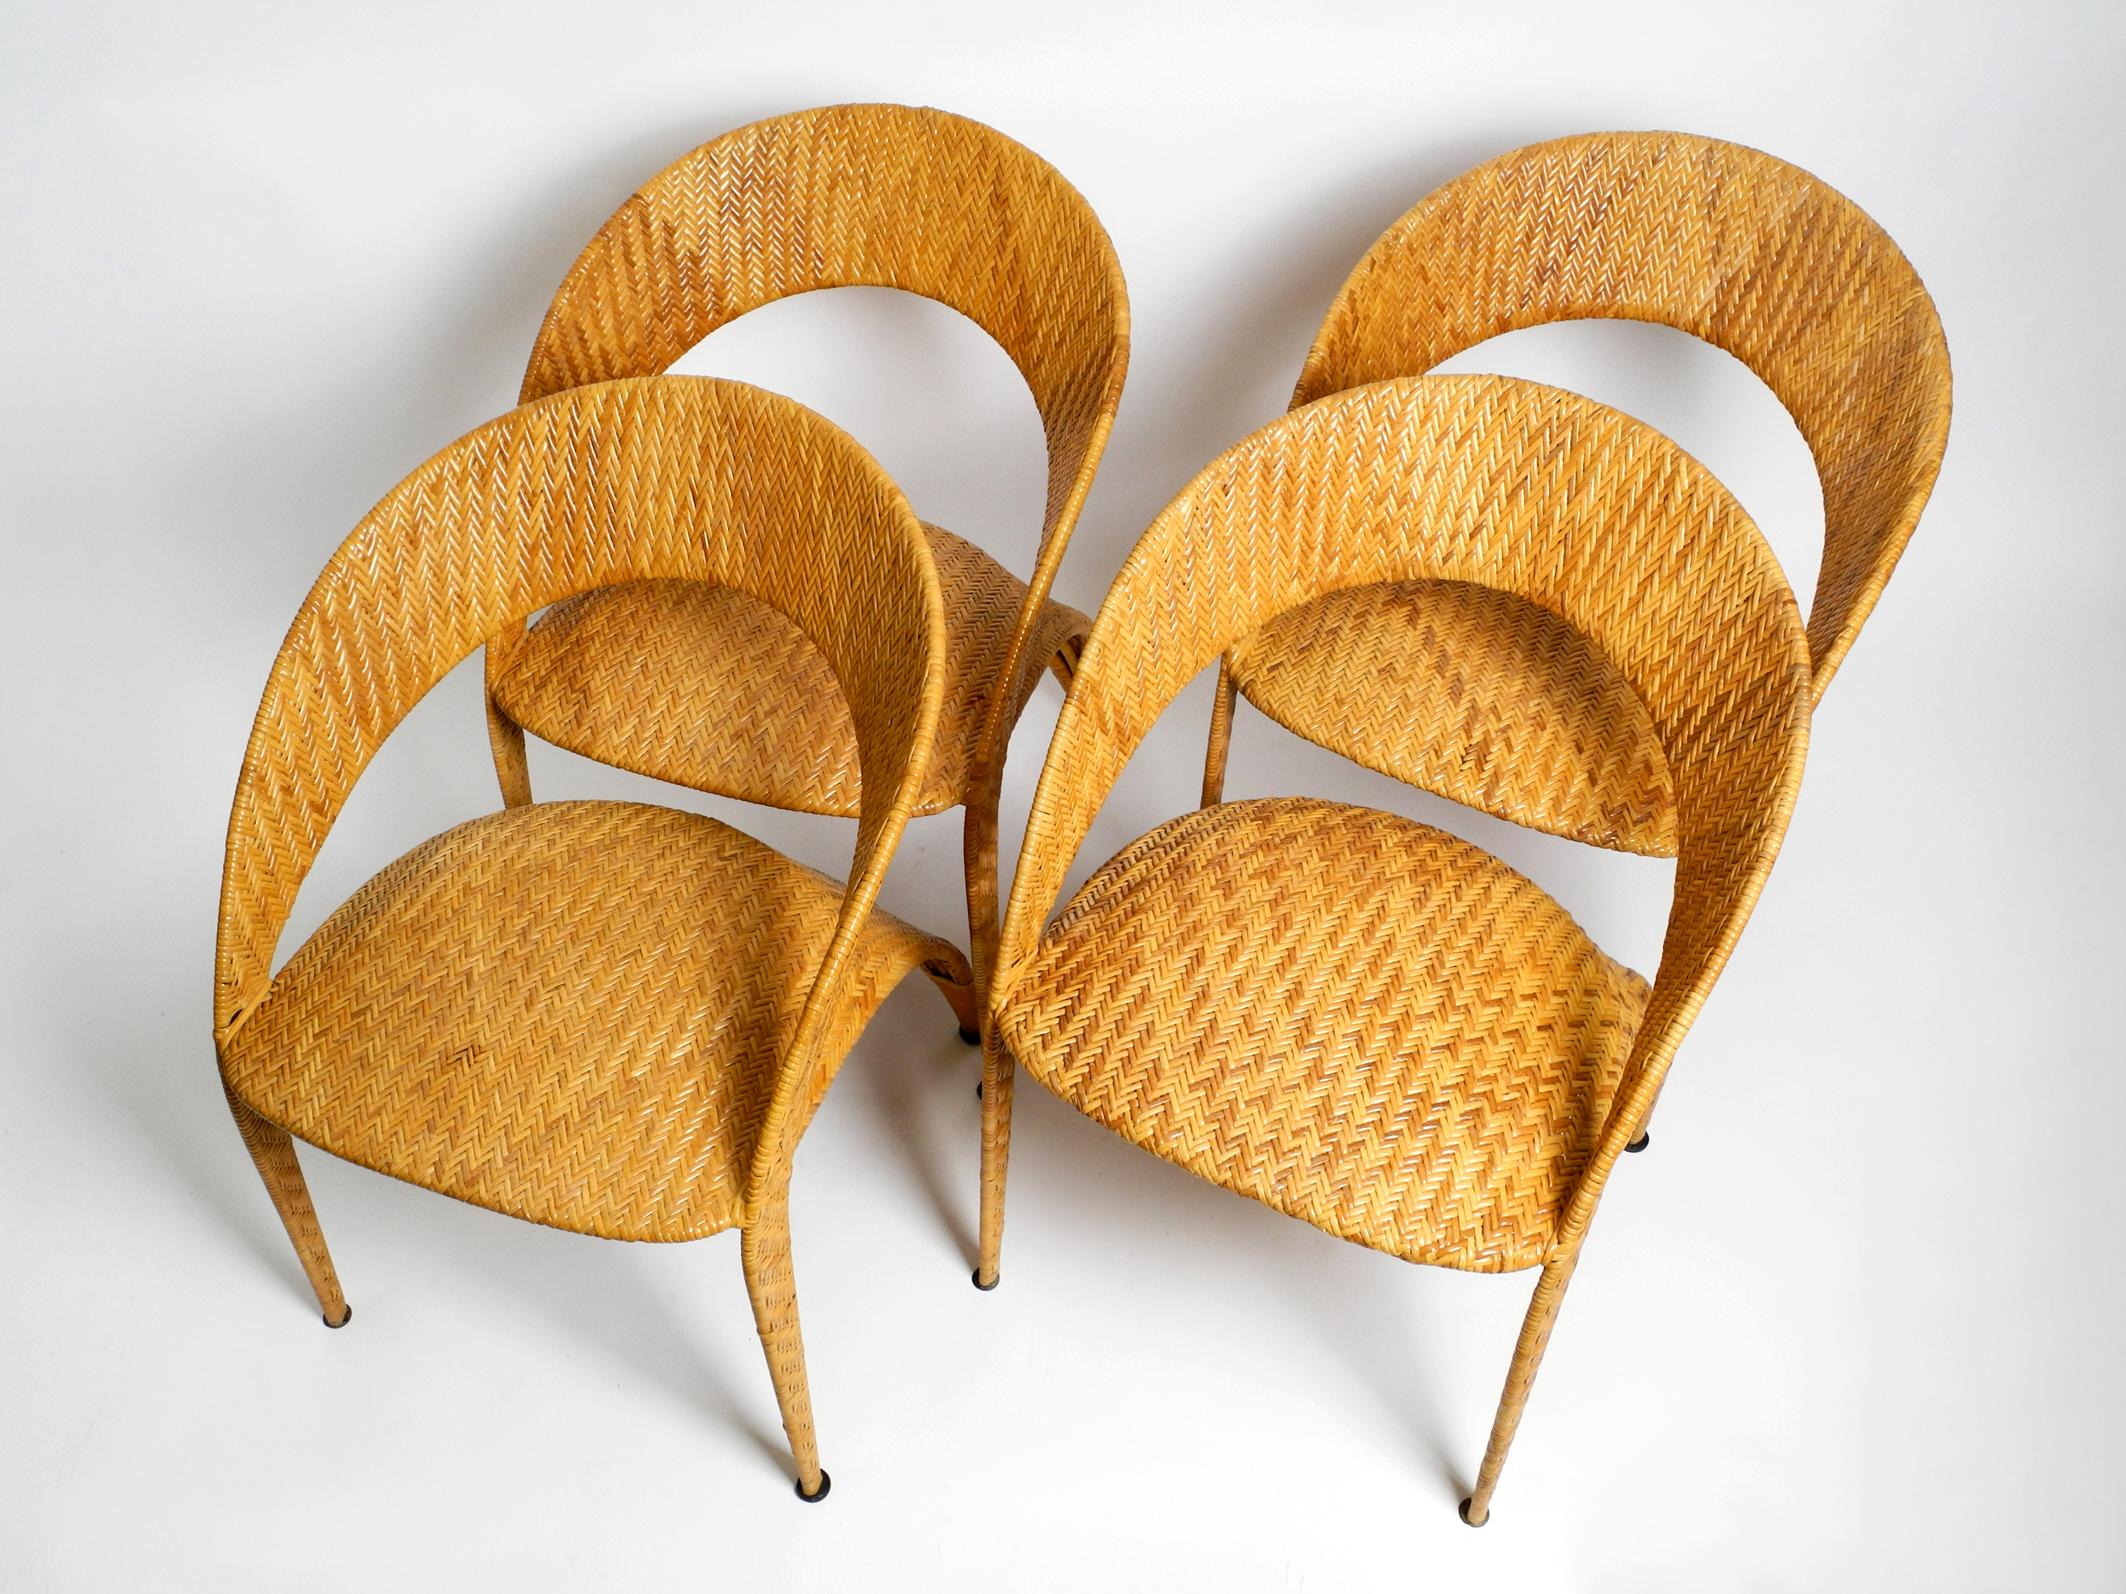 Four original 1980s rattan armchairs.
Great, very unusual Postmodern design.
With upholstered seat. As a dining room set or for  the living room or lounge.
All four chairs are in very good condition with no damage and in the same condition.
No